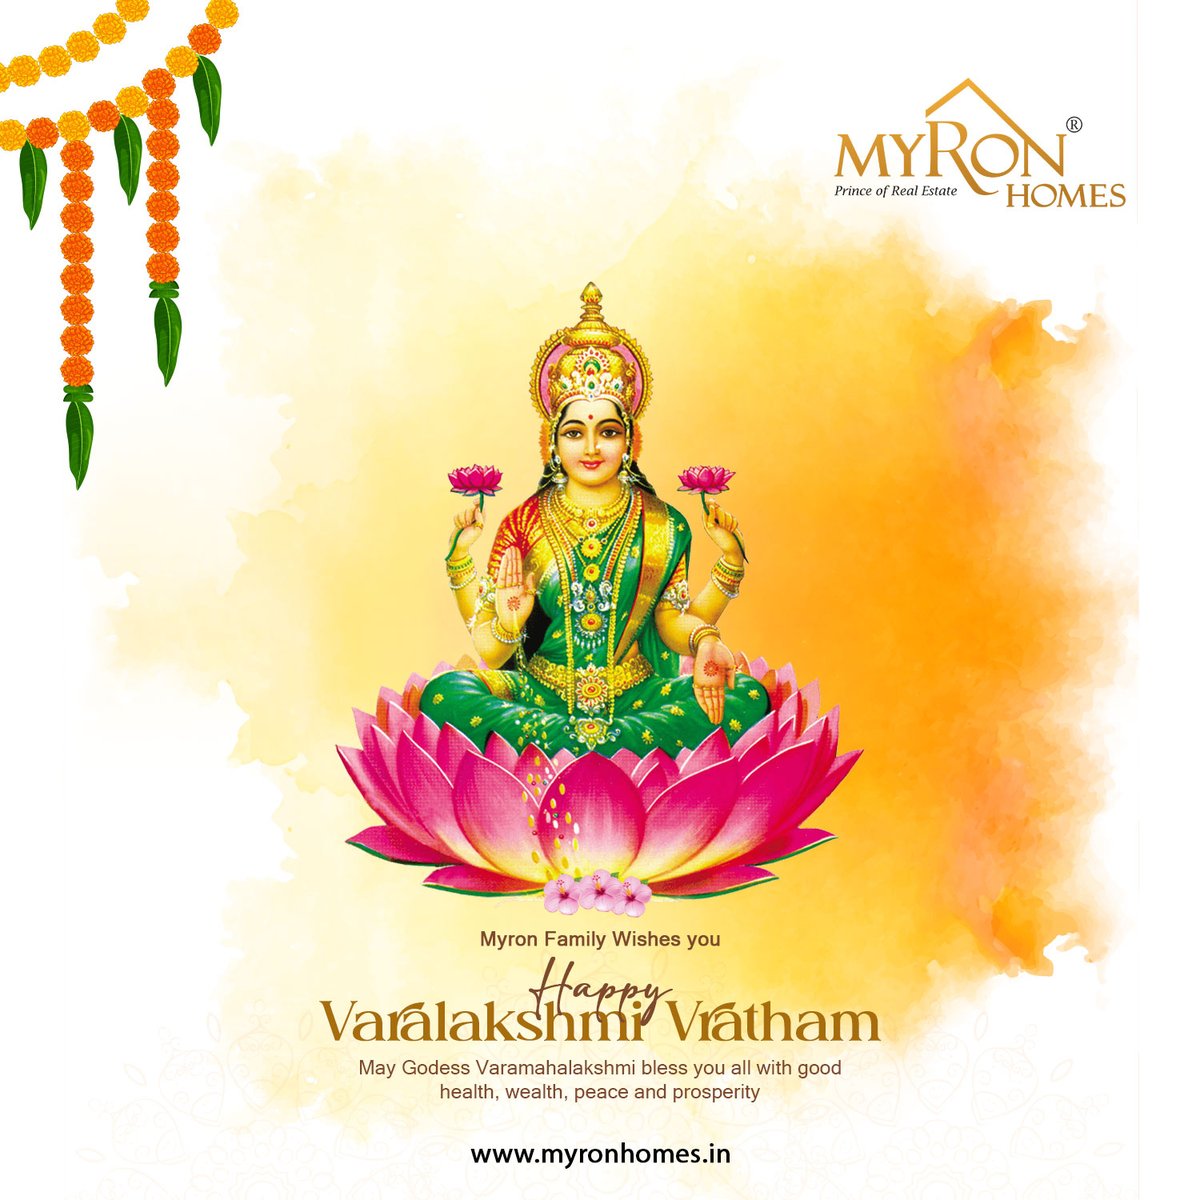 May Maa Lakshmi bring in more joy, prosperity, success, health, righteousness and divine energy into our lives. Dream higher, soar higher and achieve it all with MyRon Homes. 
.
.
.
#varalakshmivratham #pooja #goddess #lakshmidevi #myronhomes #myronhomesgroup #myronhomesinfra